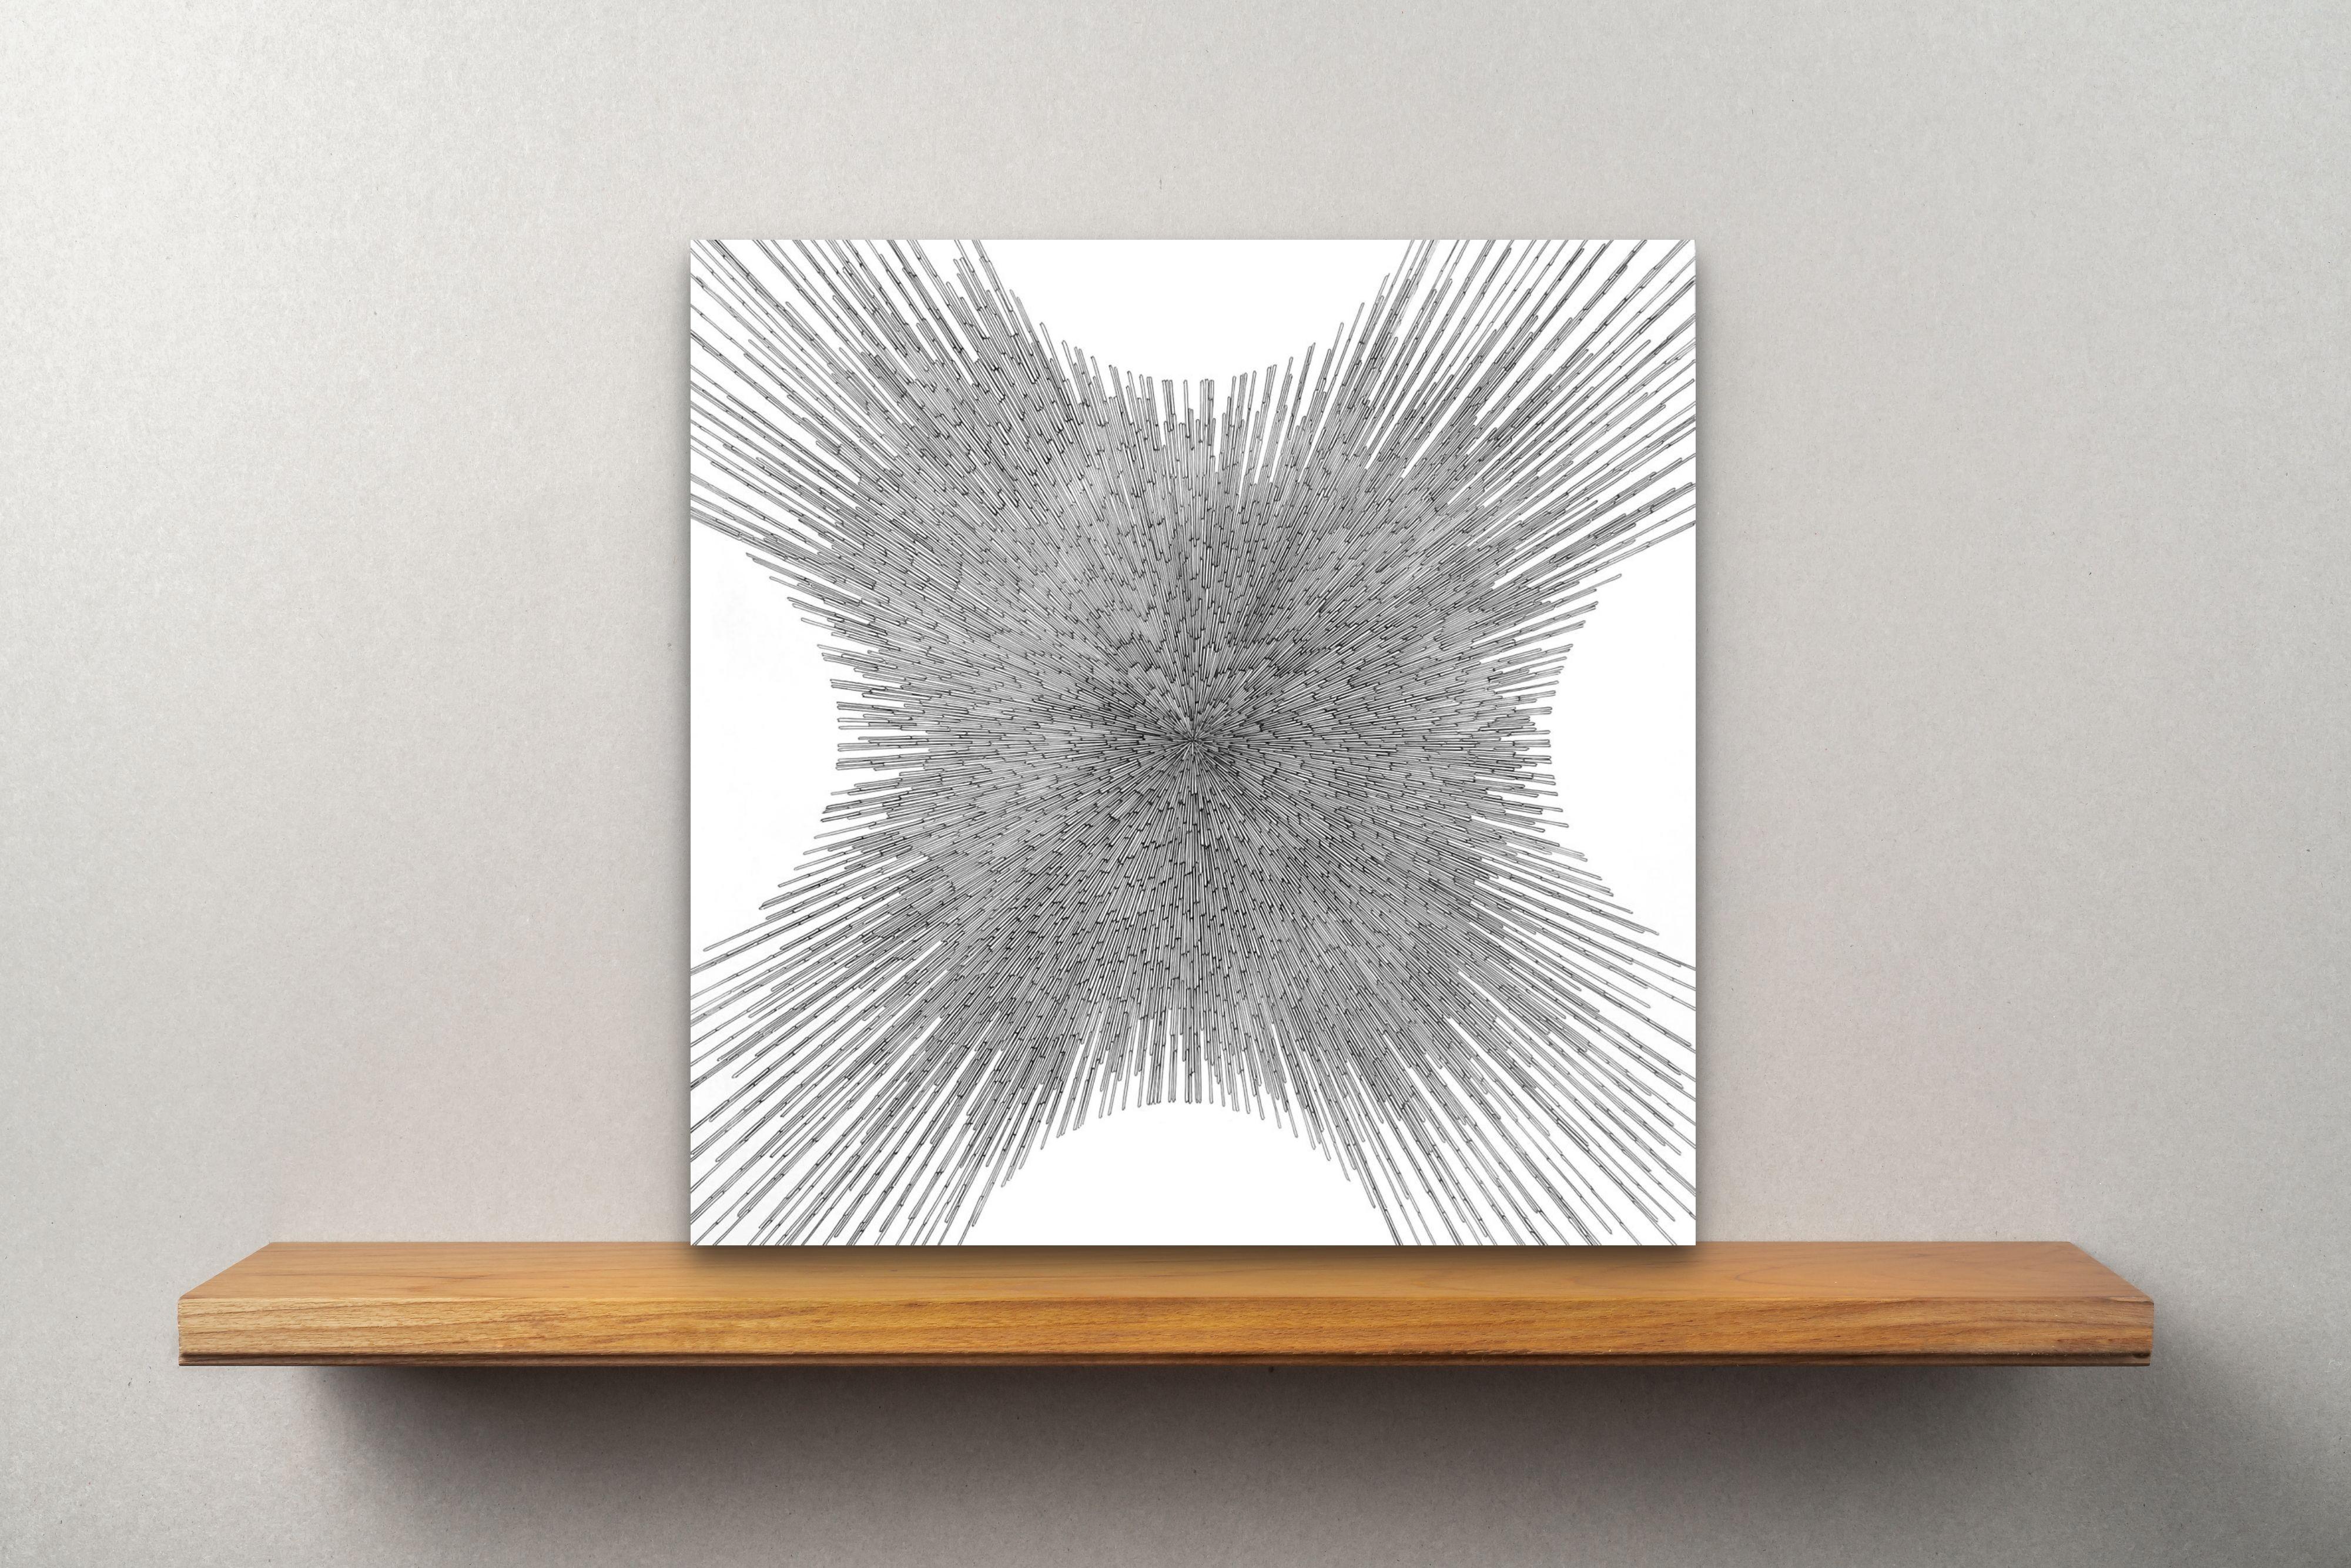 Quantum, a highly detailed geometric black ink drawing on clay-coated panel - Art by Jenifer Kent